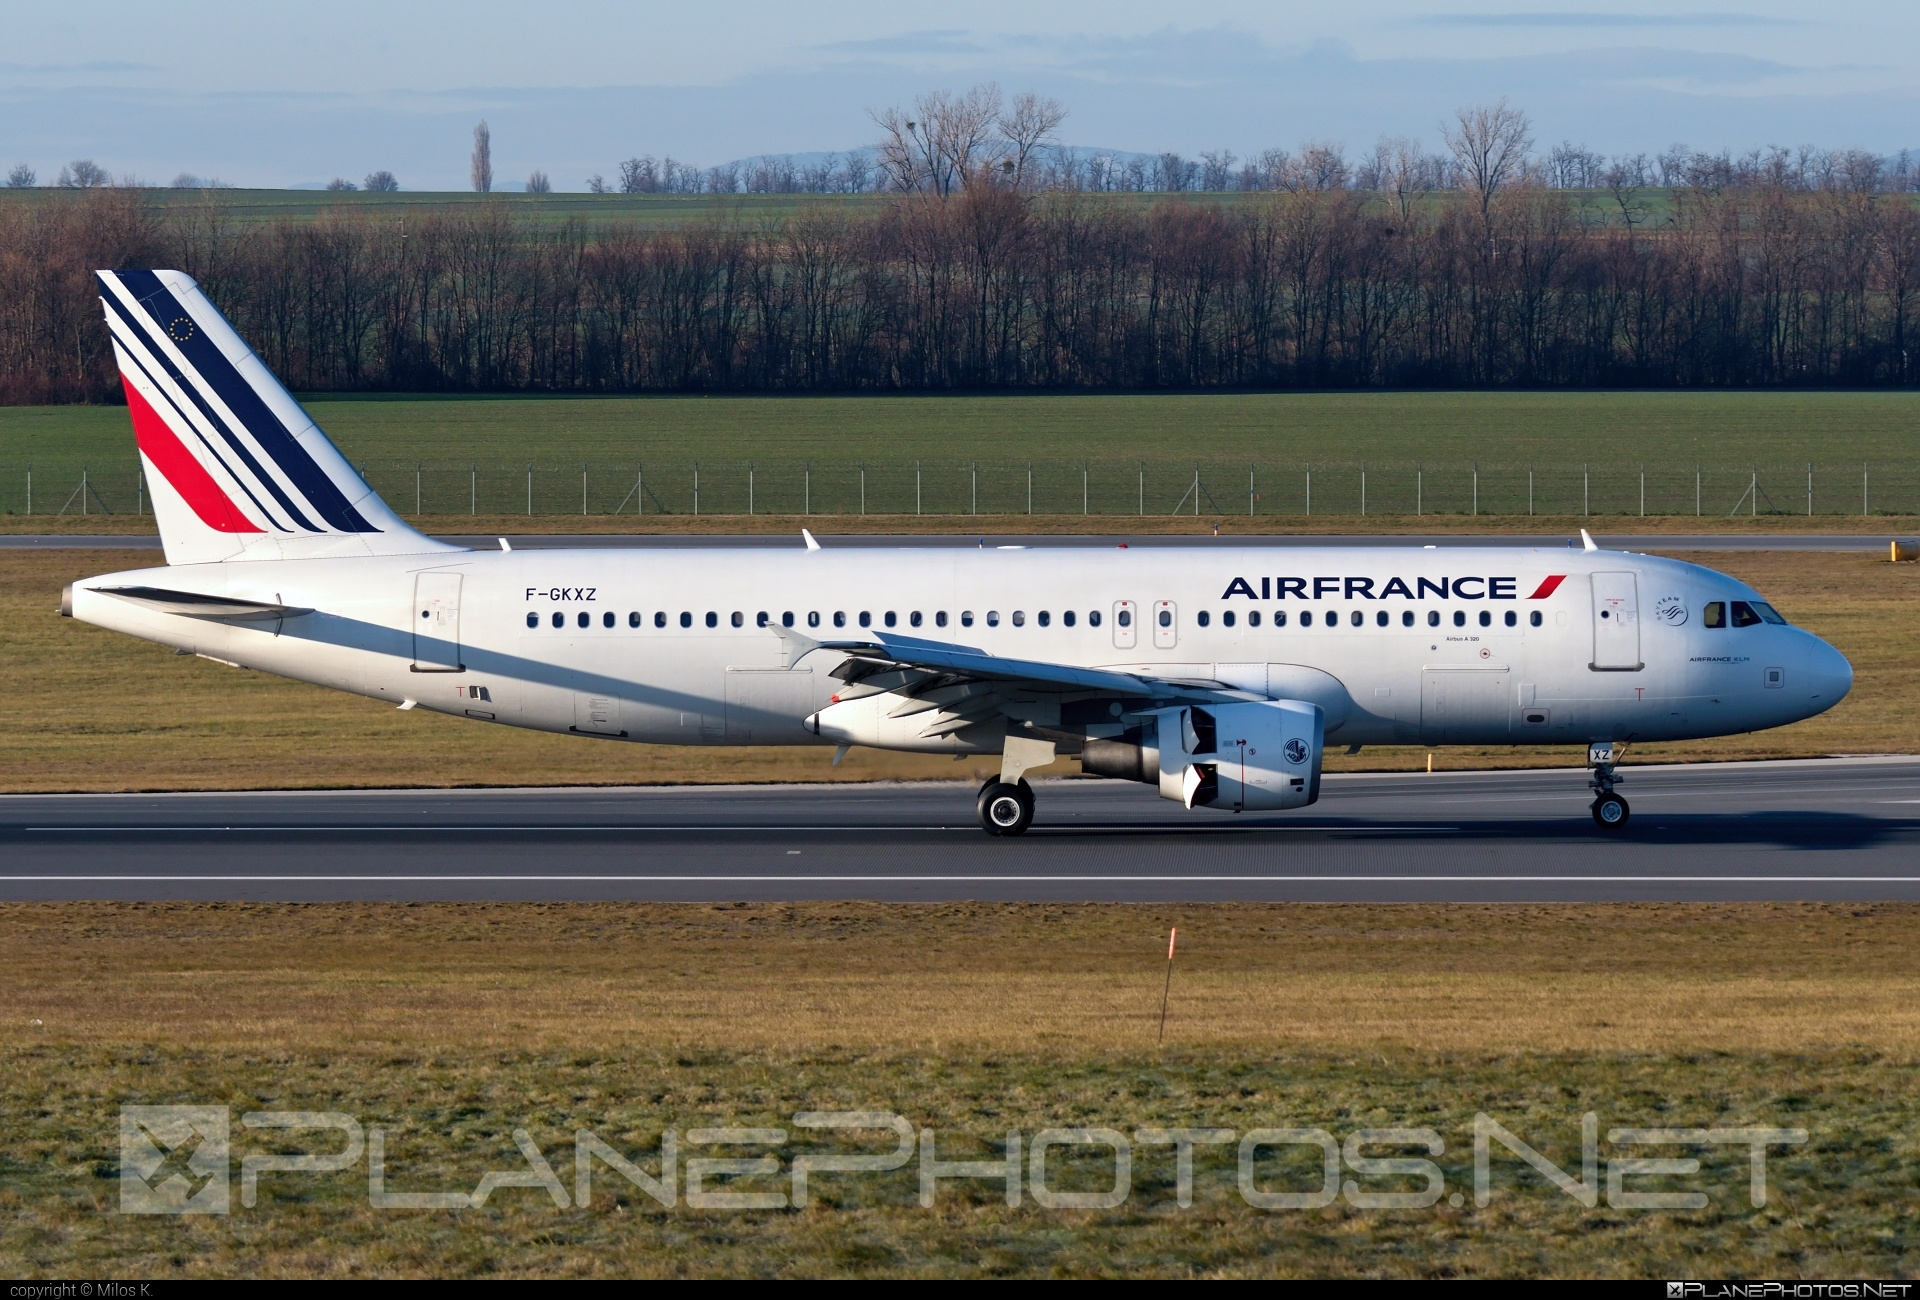 Airbus A320-214 - F-GKXZ operated by Air France #a320 #a320family #airbus #airbus320 #airfrance